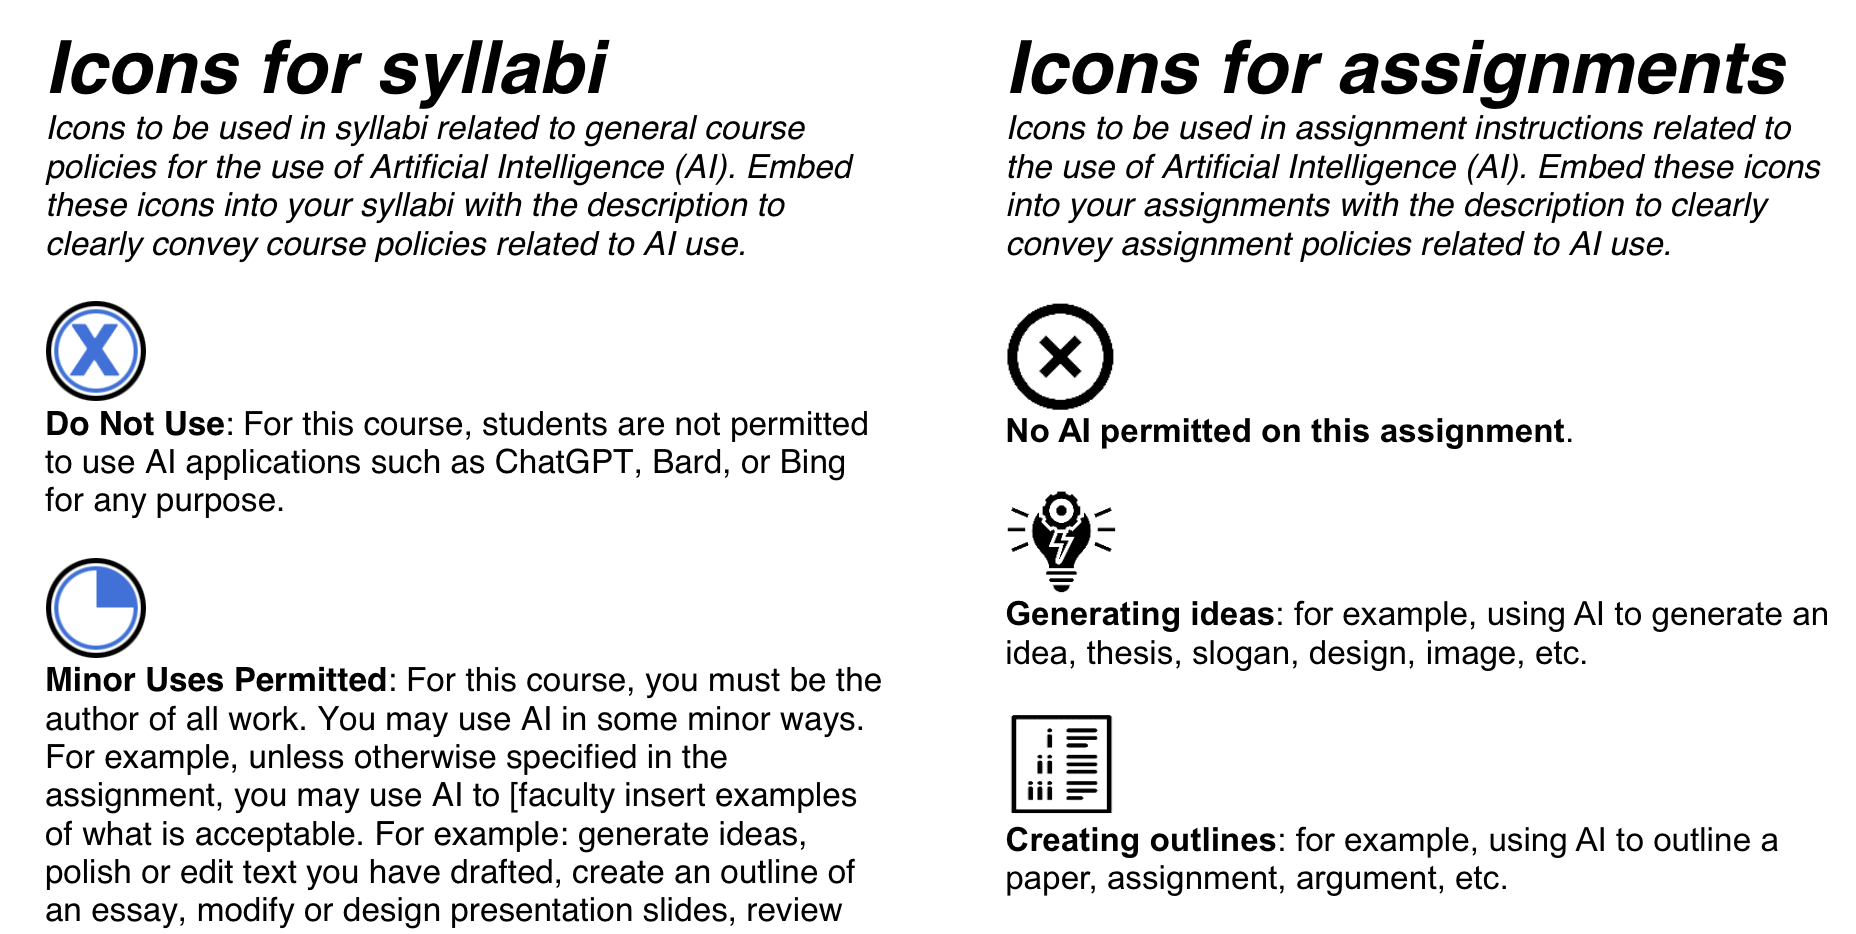 Icons for guidance on AI usage for syllabi and assignments.